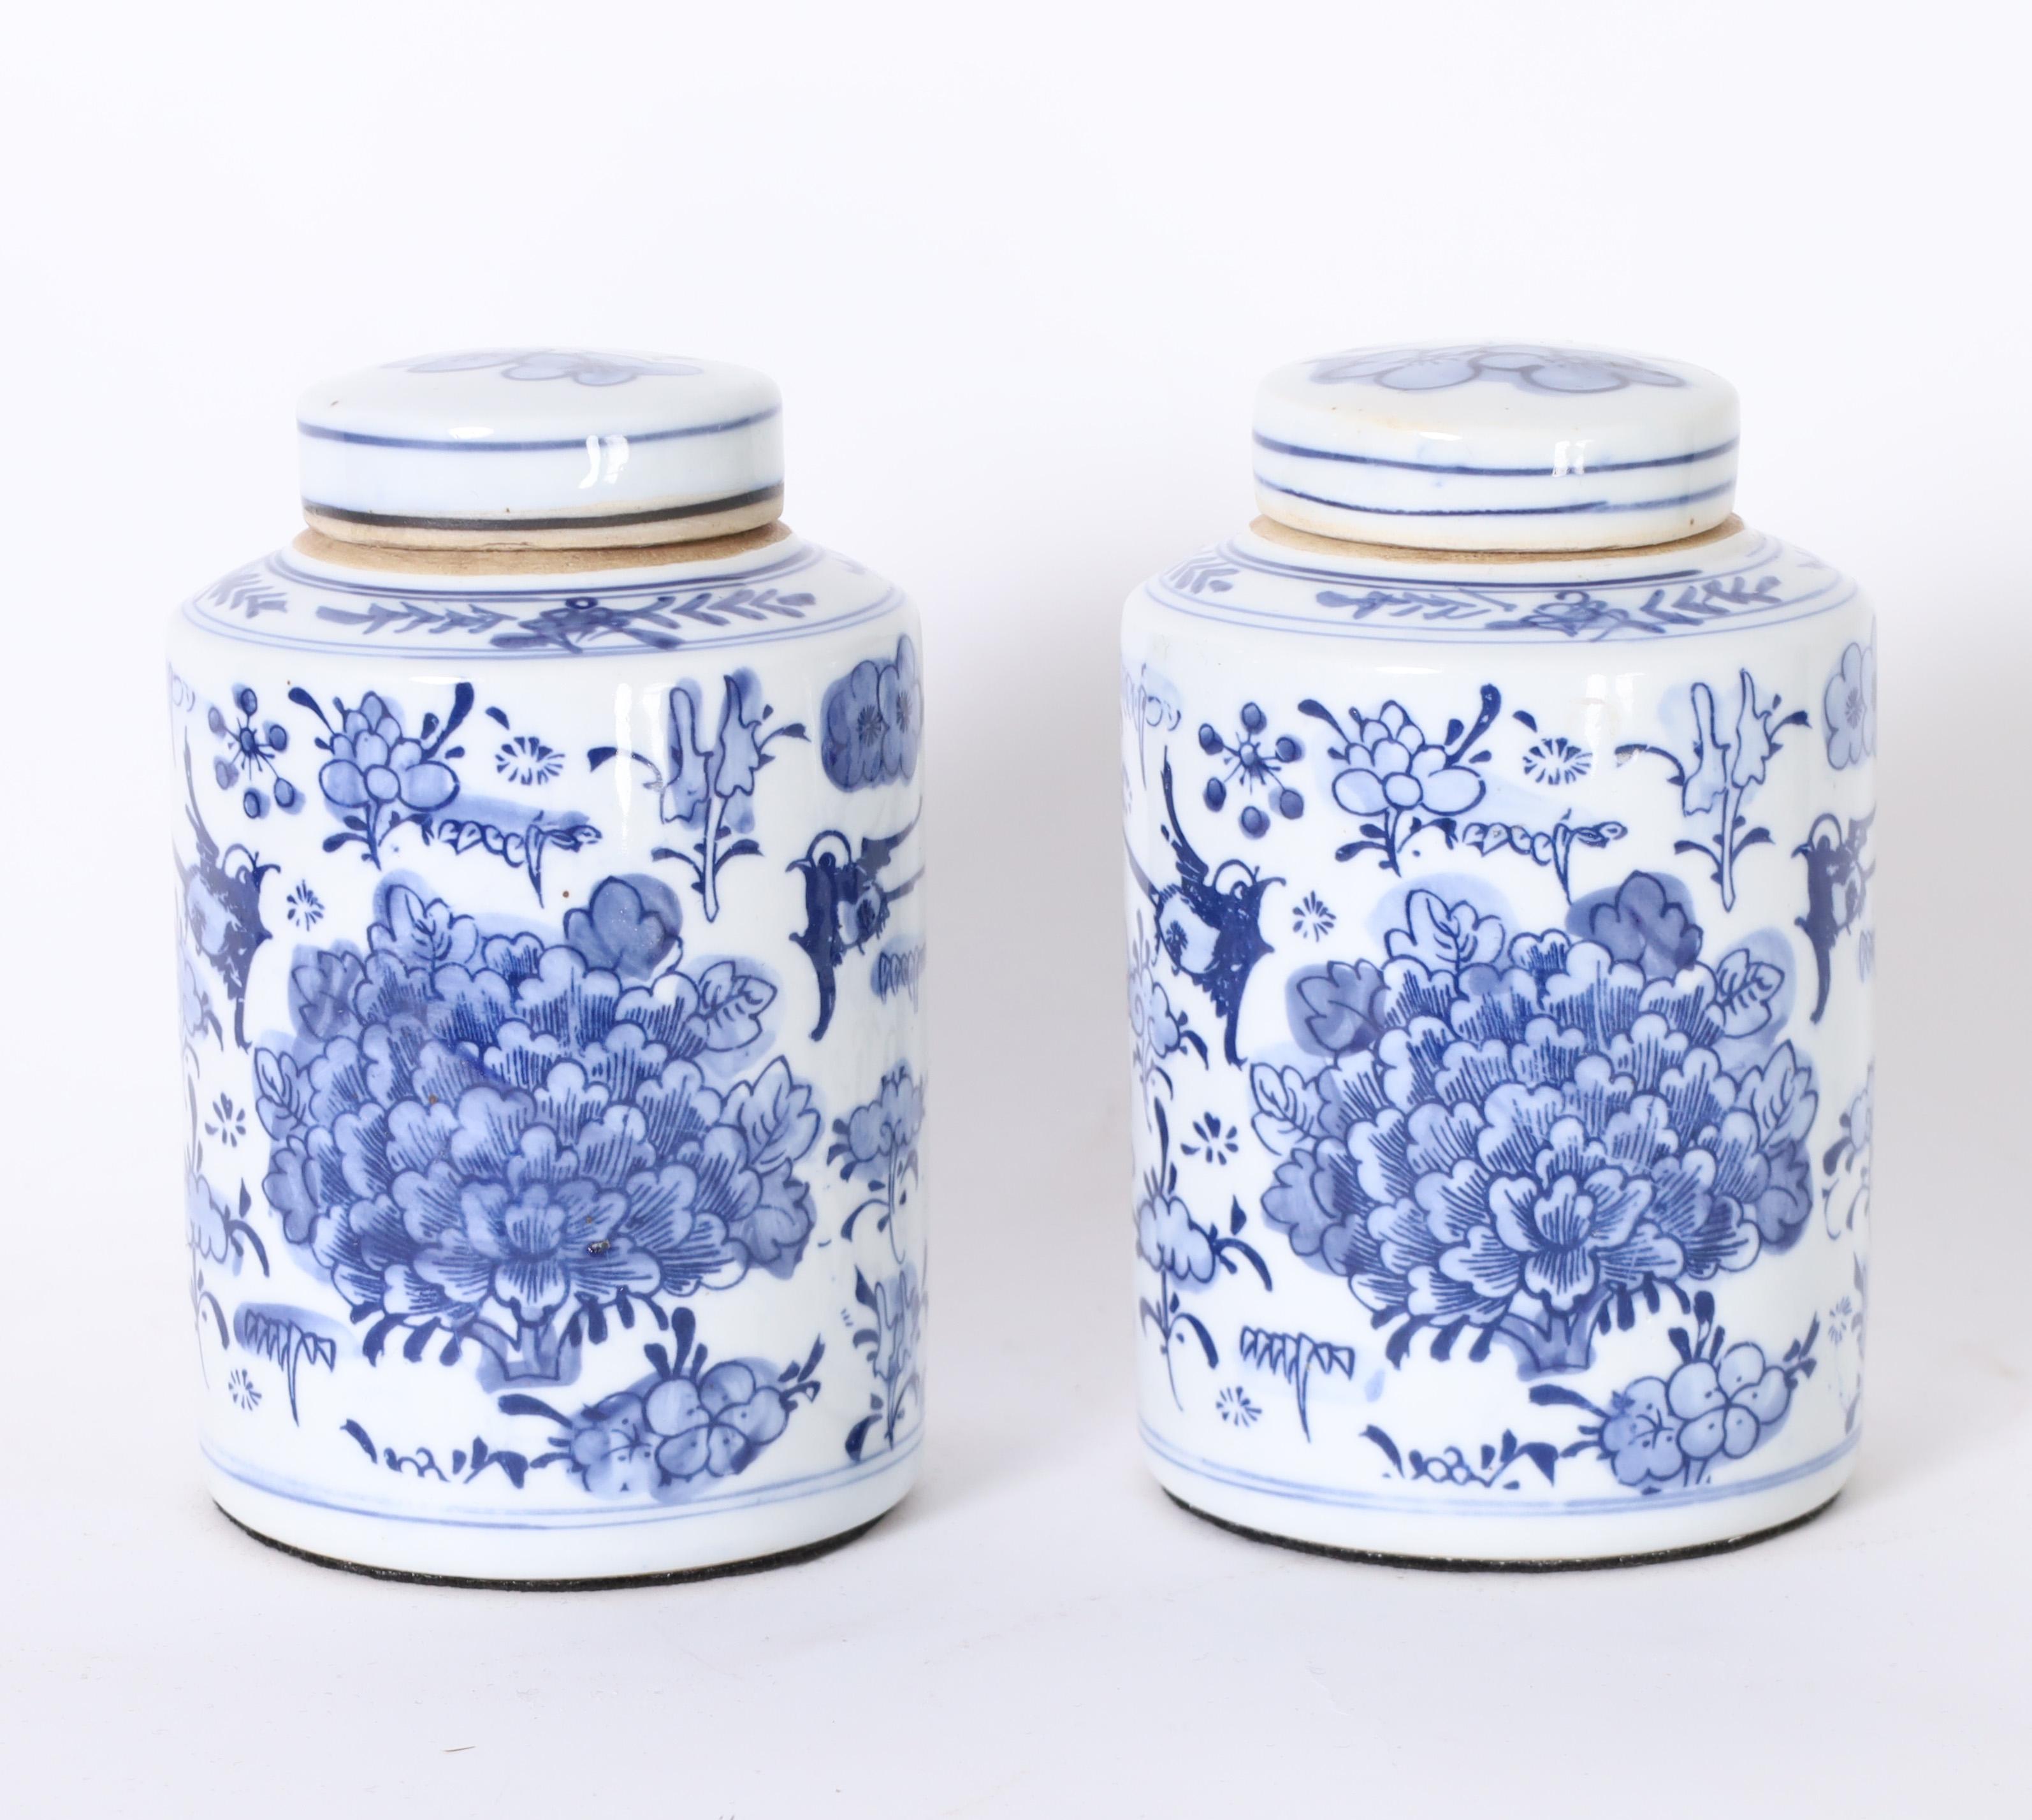 Delightful pair of Chinese blue and white porcelain lidded ginger jars hand decorated with lotus leaves and flowers. 